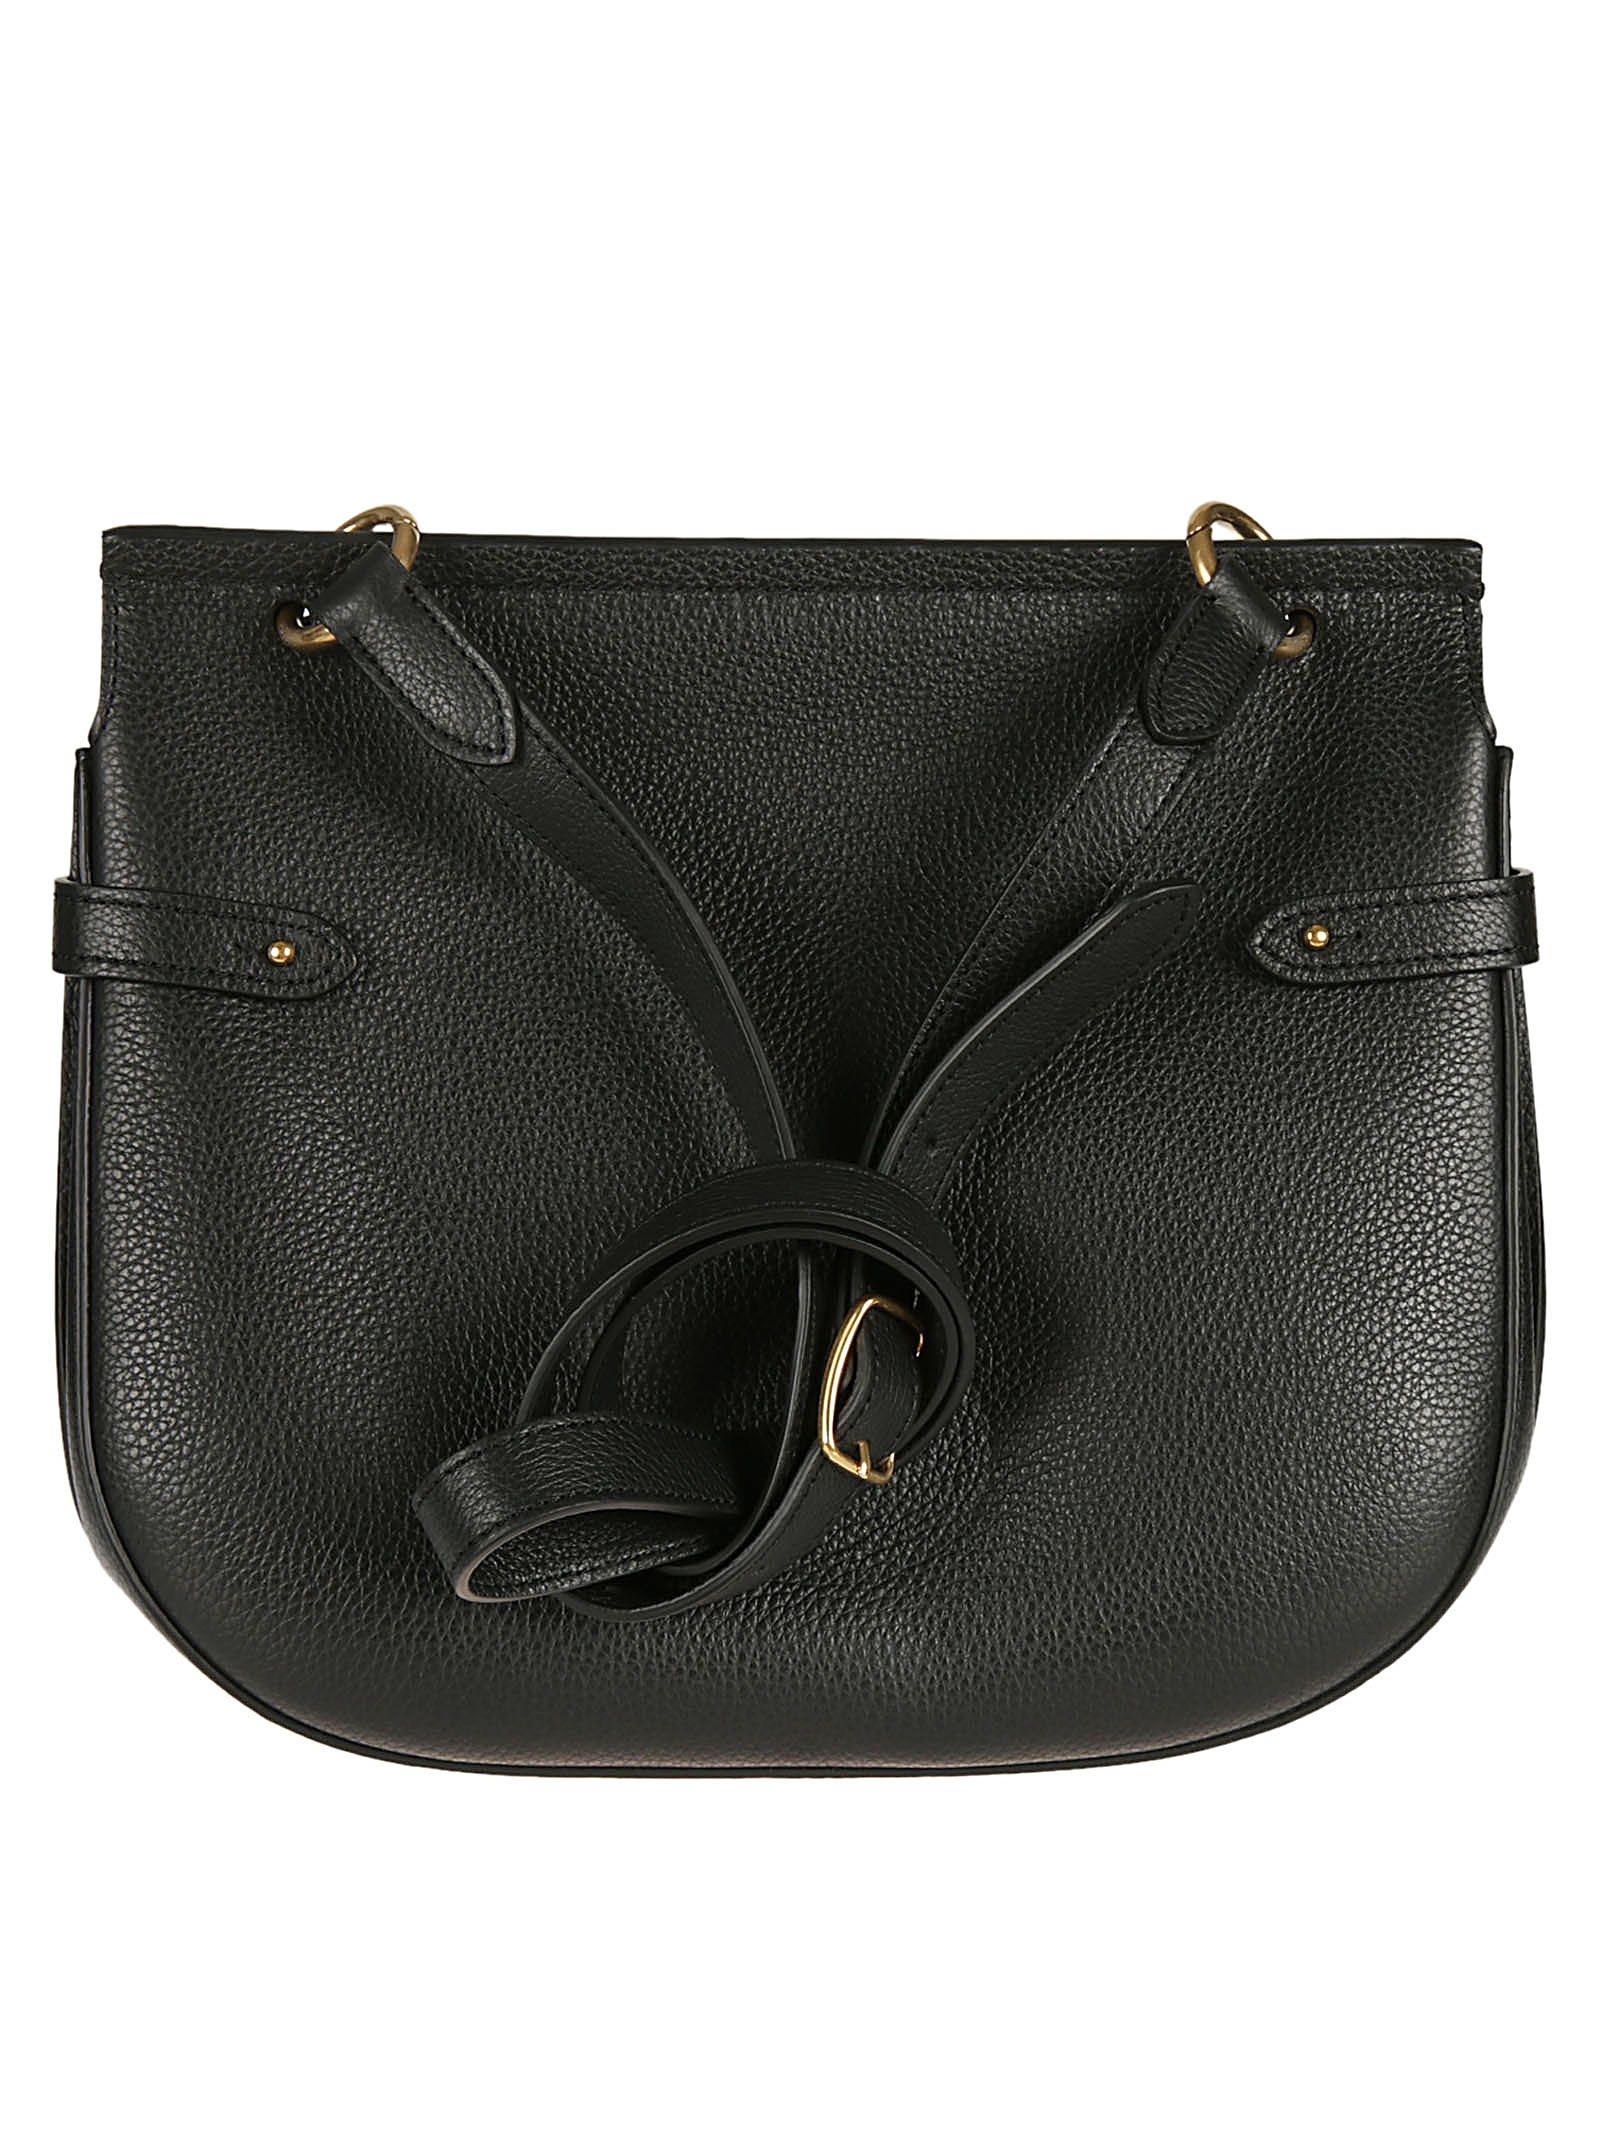 italist | Best price in the market for Mulberry Mulberry Small Embossed ...